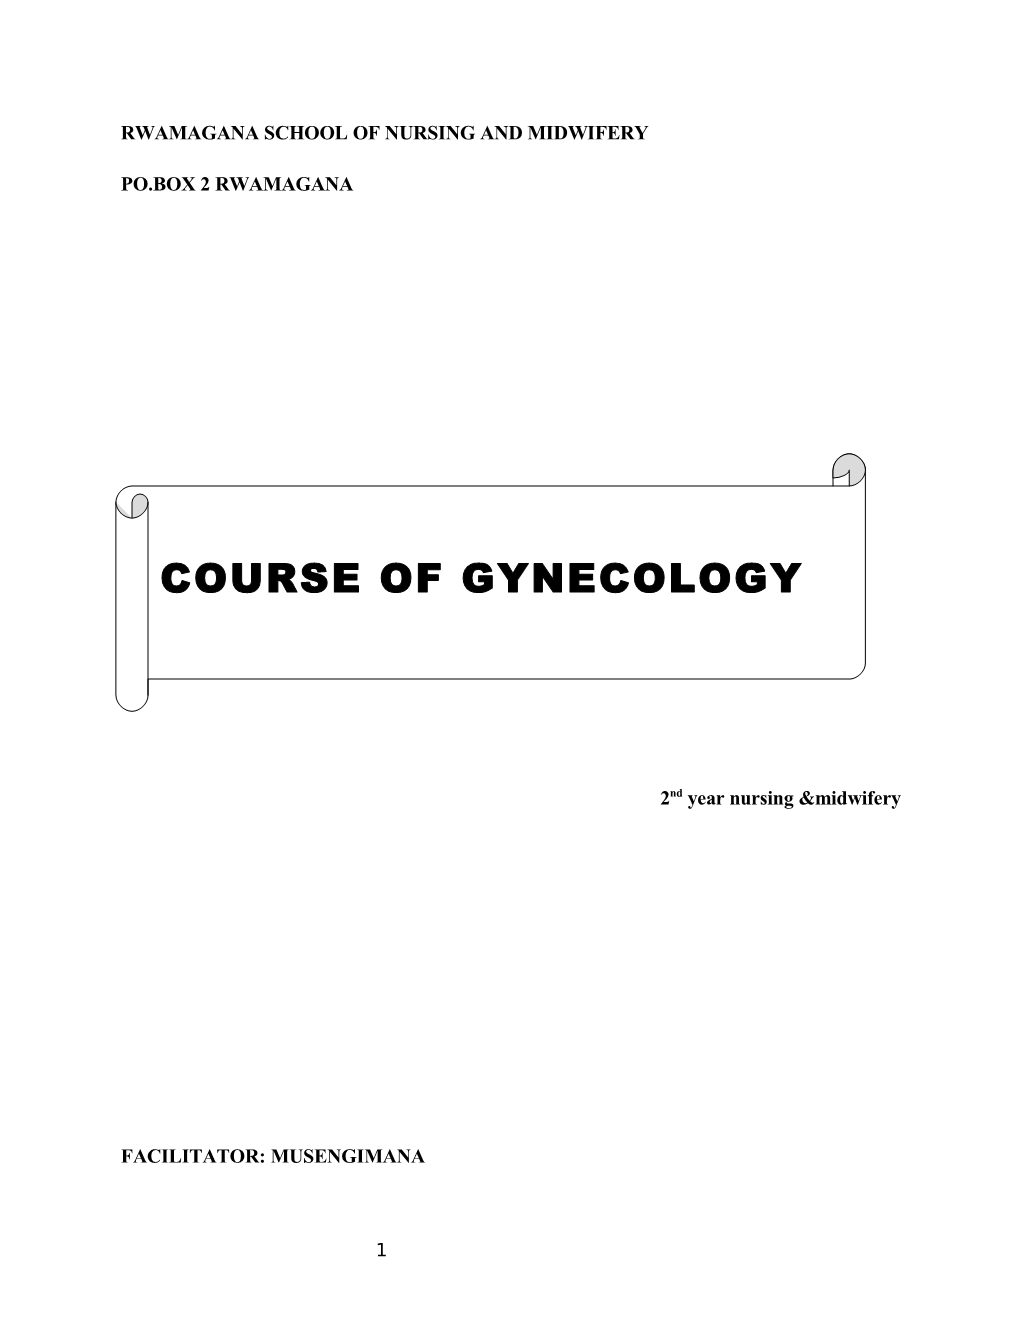 Course of Gynecology